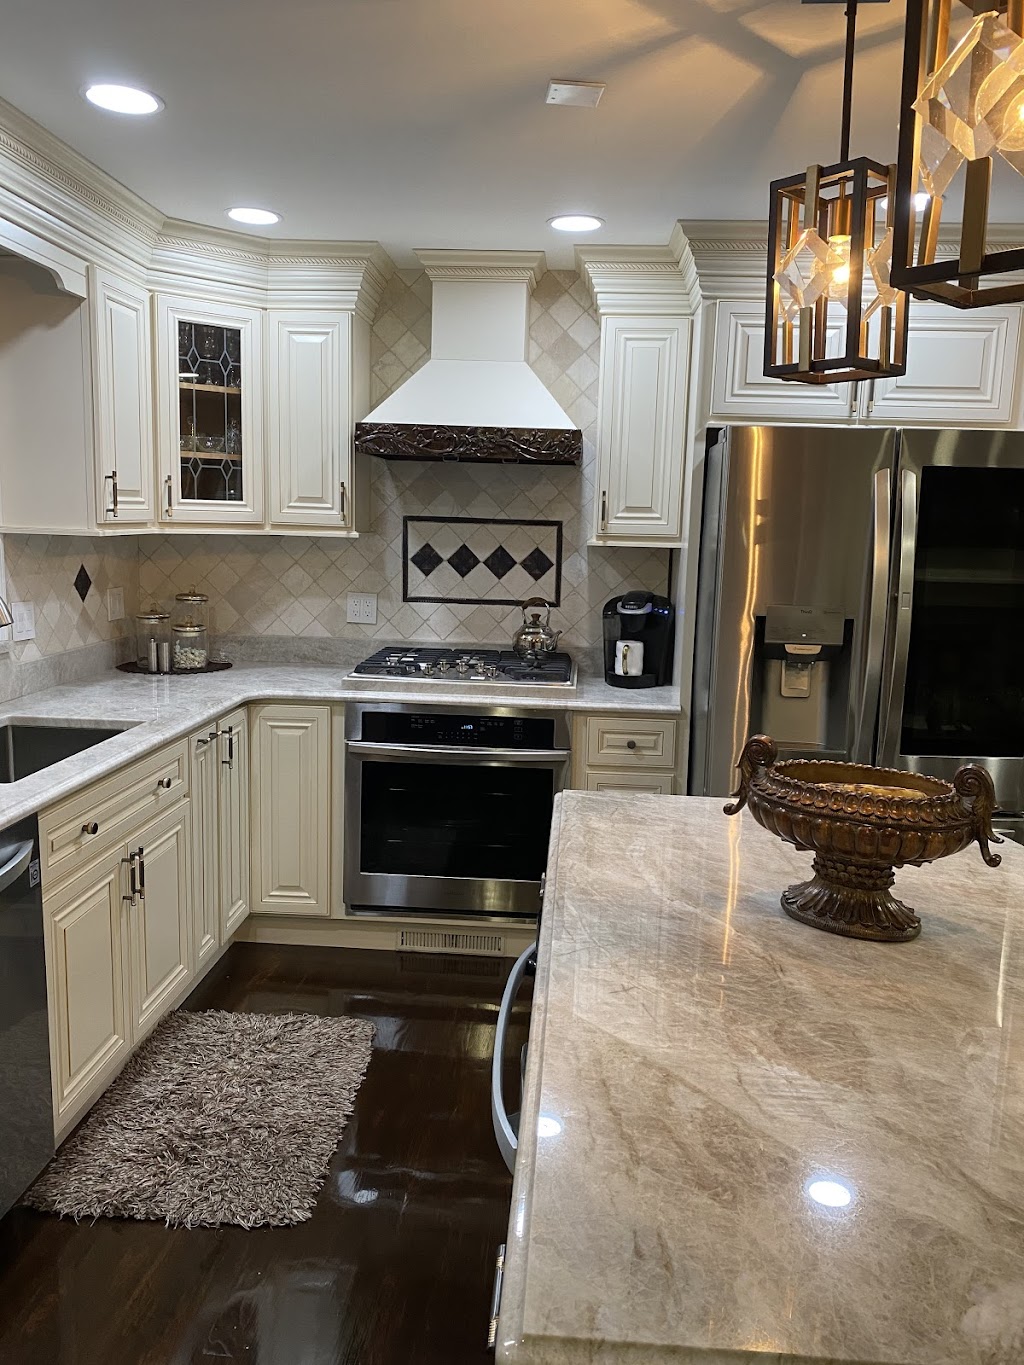 River Cabinetry Kitchen and Bath | 352 S Broadway Unit A, Salem, NH 03079 | Phone: (603) 458-7718